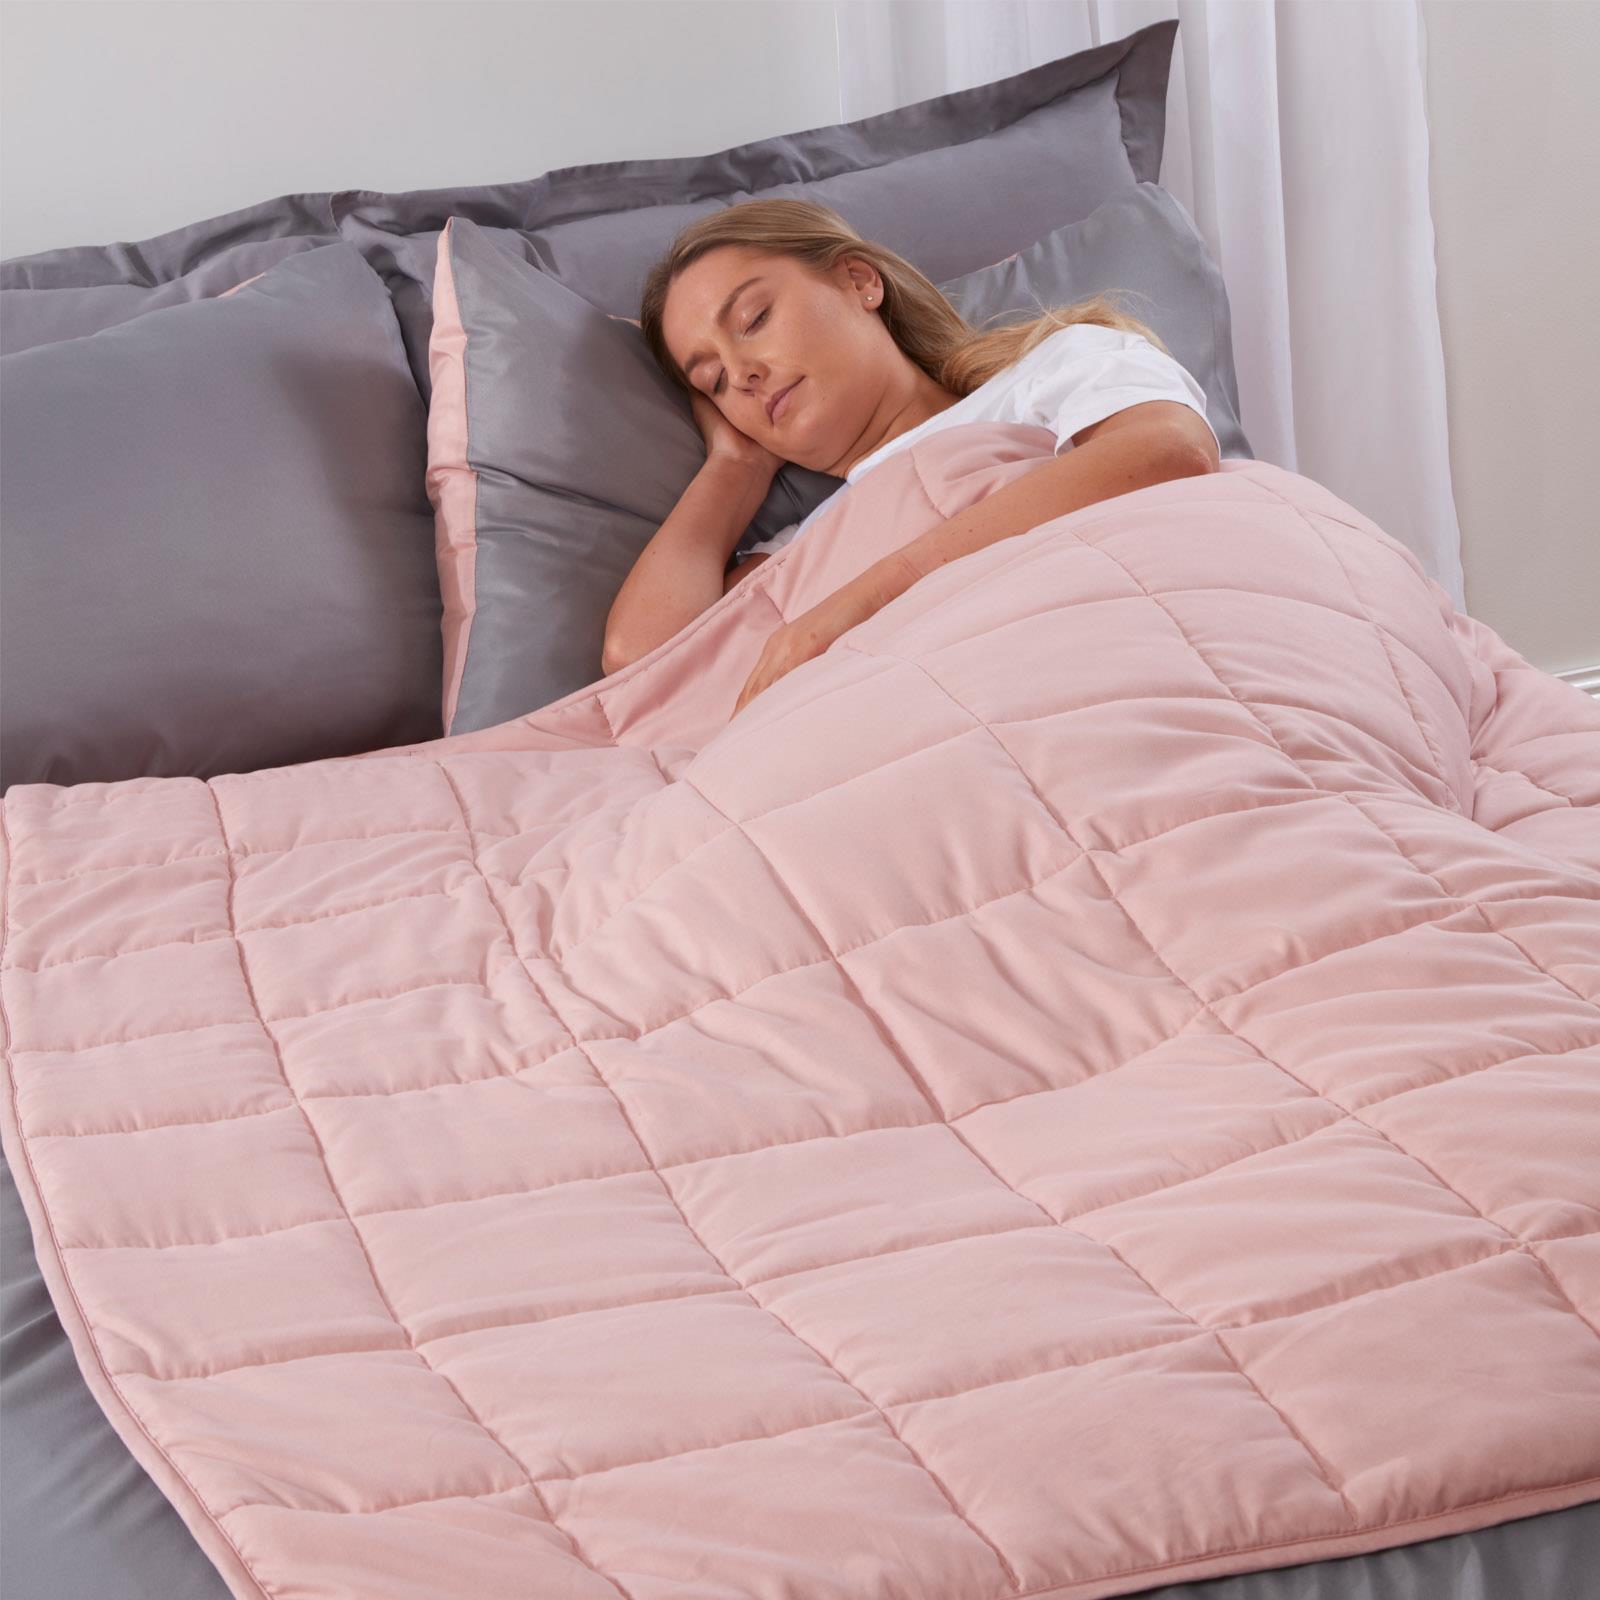 Luxury Life's Weighted Quilted Double Blanket in Blush Pink | INTOTO7